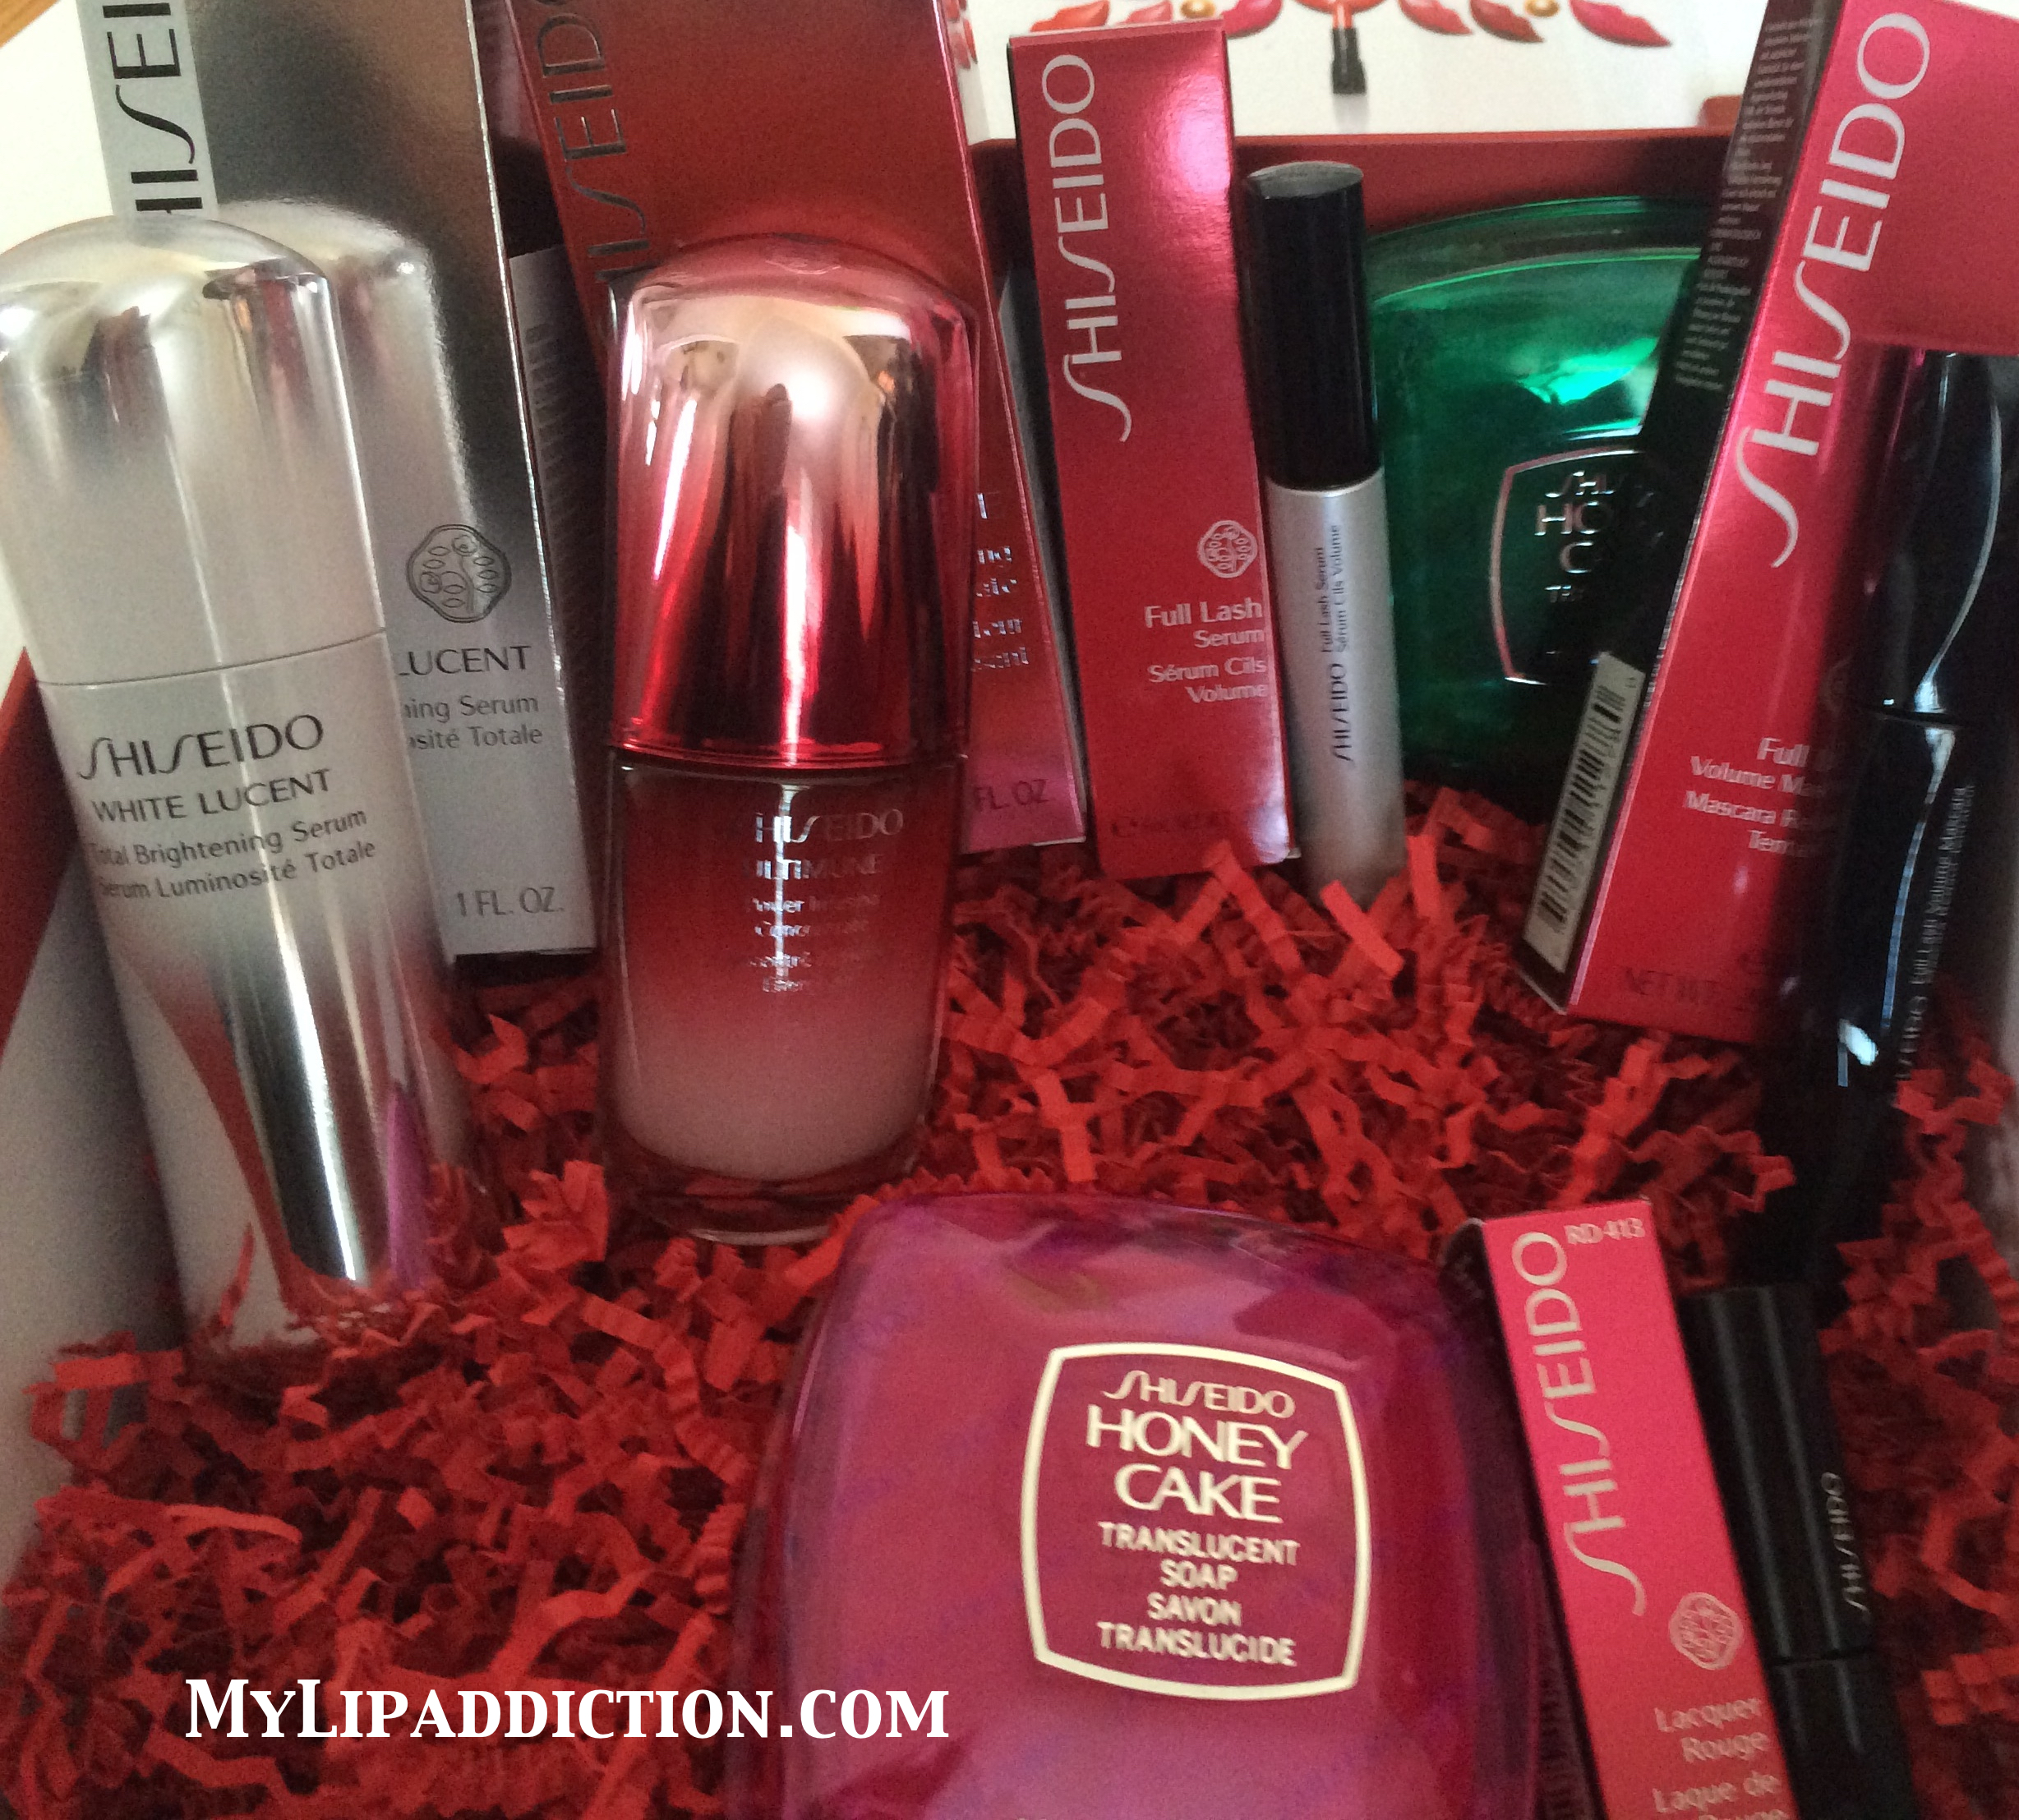 #SparkleWithJoy part 2 - the beautiful products we received!